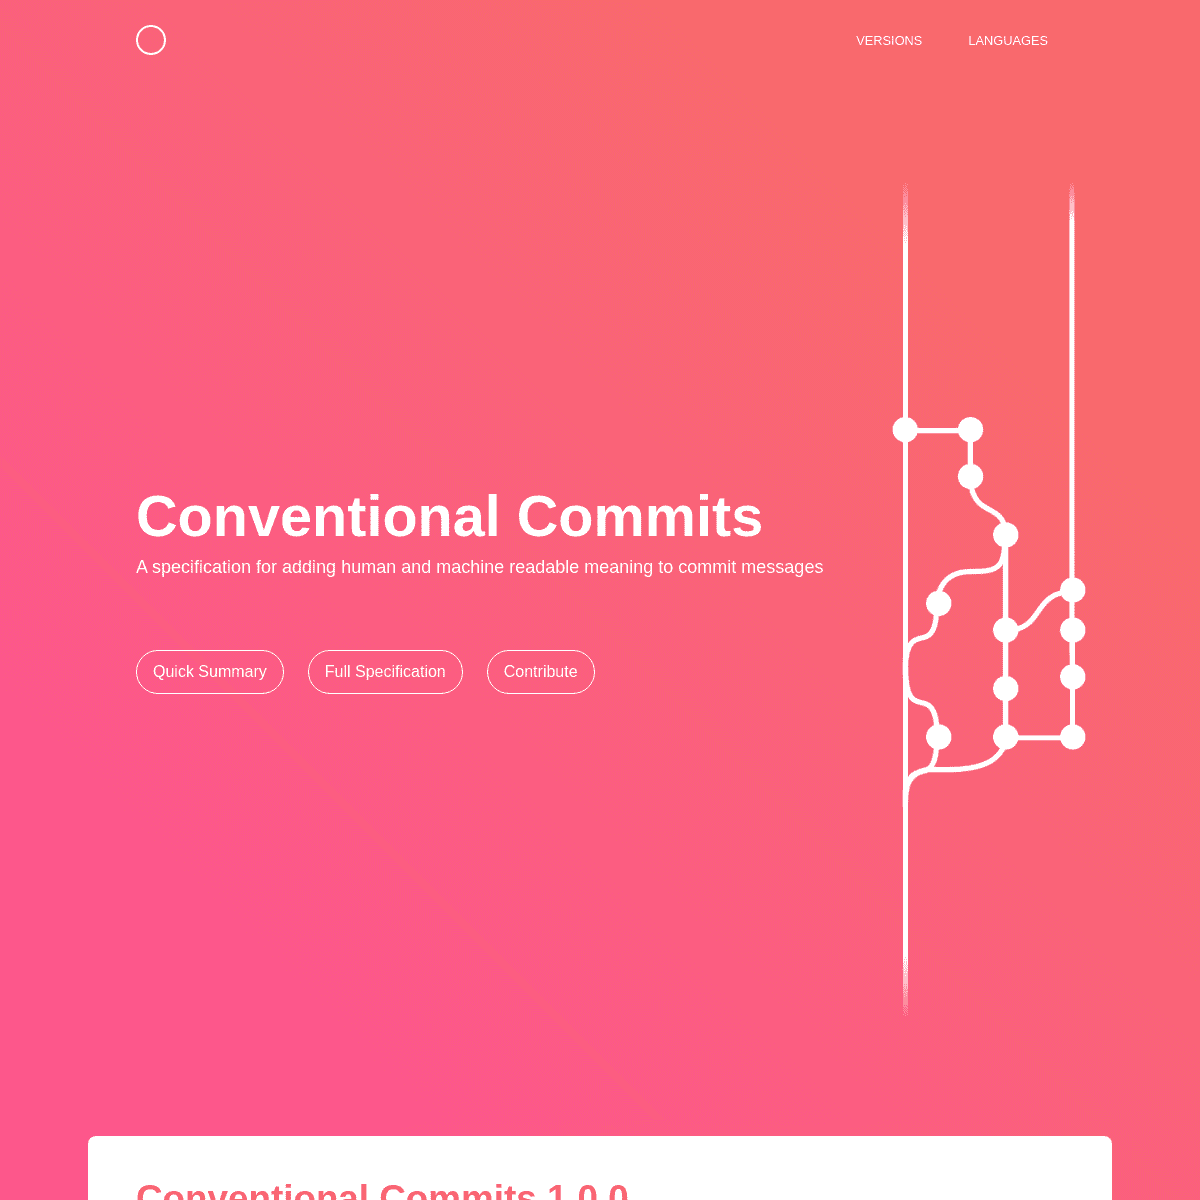 A complete backup of https://conventionalcommits.org